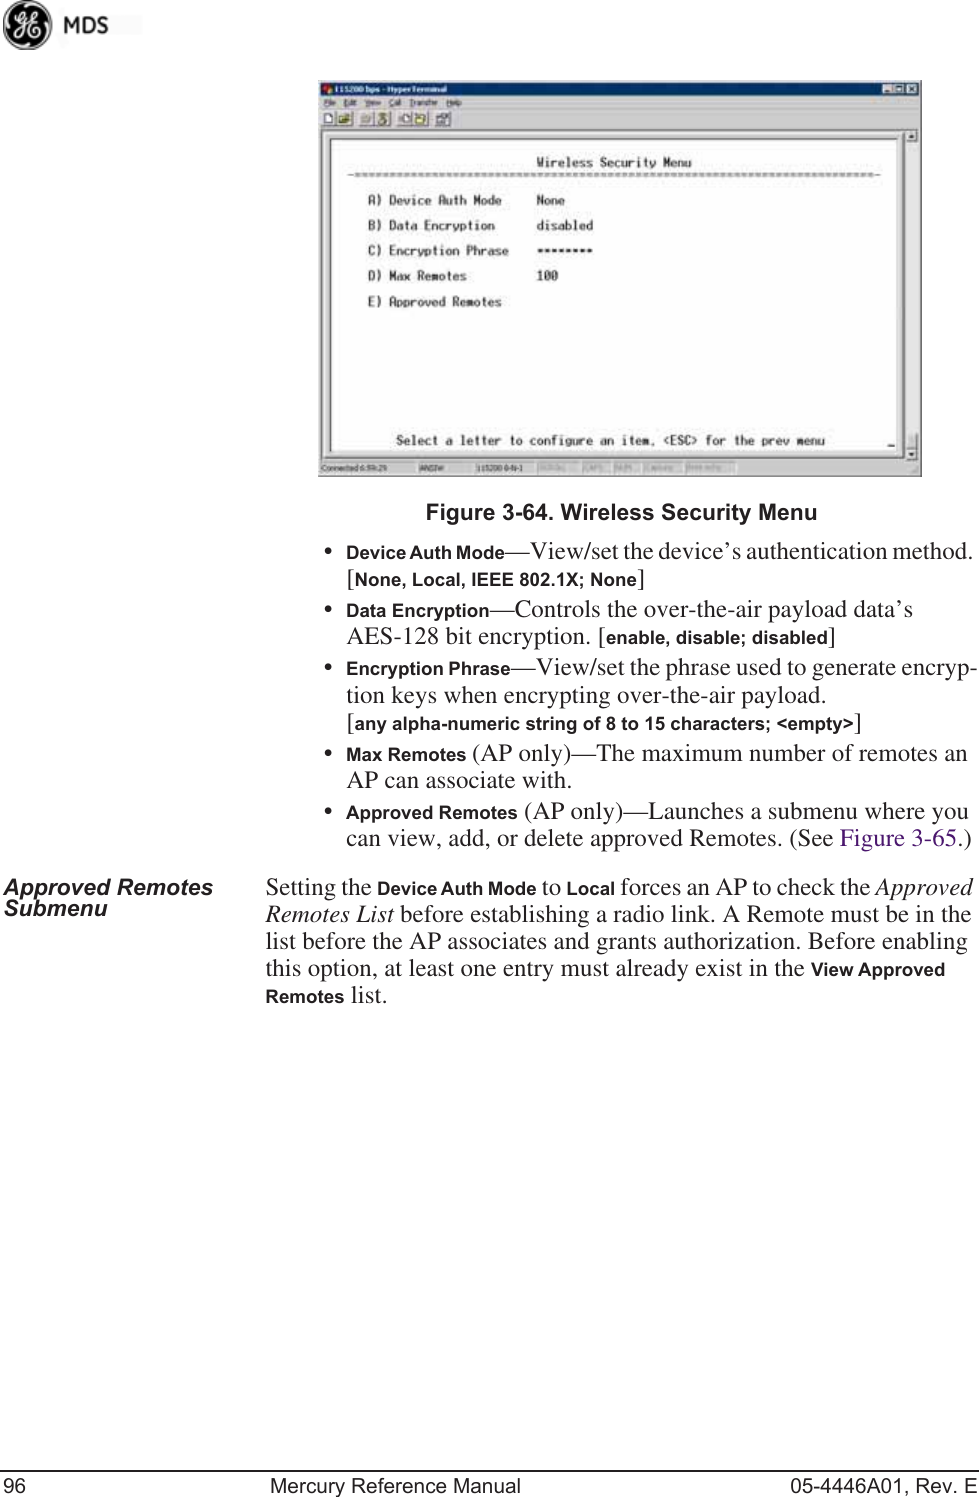 96 Mercury Reference Manual 05-4446A01, Rev. EInvisible place holderFigure 3-64. Wireless Security Menu•Device Auth Mode—View/set the device’s authentication method. [None, Local, IEEE 802.1X; None]•Data Encryption—Controls the over-the-air payload data’s AES-128 bit encryption. [enable, disable; disabled]•Encryption Phrase—View/set the phrase used to generate encryp-tion keys when encrypting over-the-air payload. [any alpha-numeric string of 8 to 15 characters; &lt;empty&gt;]•Max Remotes (AP only)—The maximum number of remotes an AP can associate with.•Approved Remotes (AP only)—Launches a submenu where you can view, add, or delete approved Remotes. (See Figure 3-65.)Approved Remotes Submenu Setting the Device Auth Mode to Local forces an AP to check the Approved Remotes List before establishing a radio link. A Remote must be in the list before the AP associates and grants authorization. Before enabling this option, at least one entry must already exist in the View Approved Remotes list.